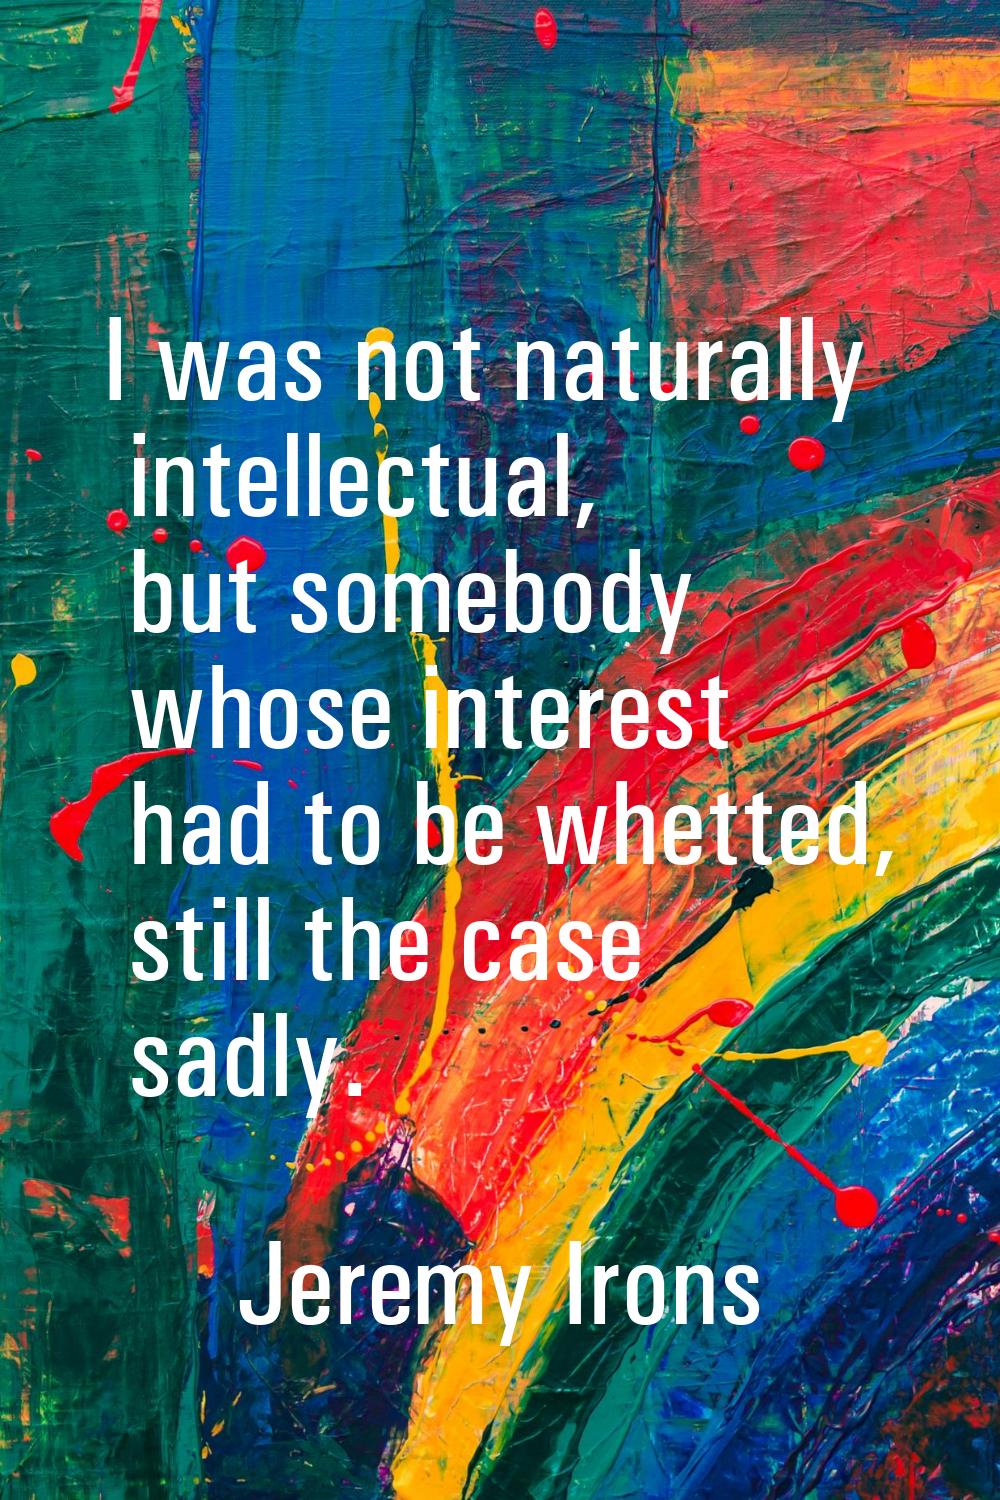 I was not naturally intellectual, but somebody whose interest had to be whetted, still the case sad